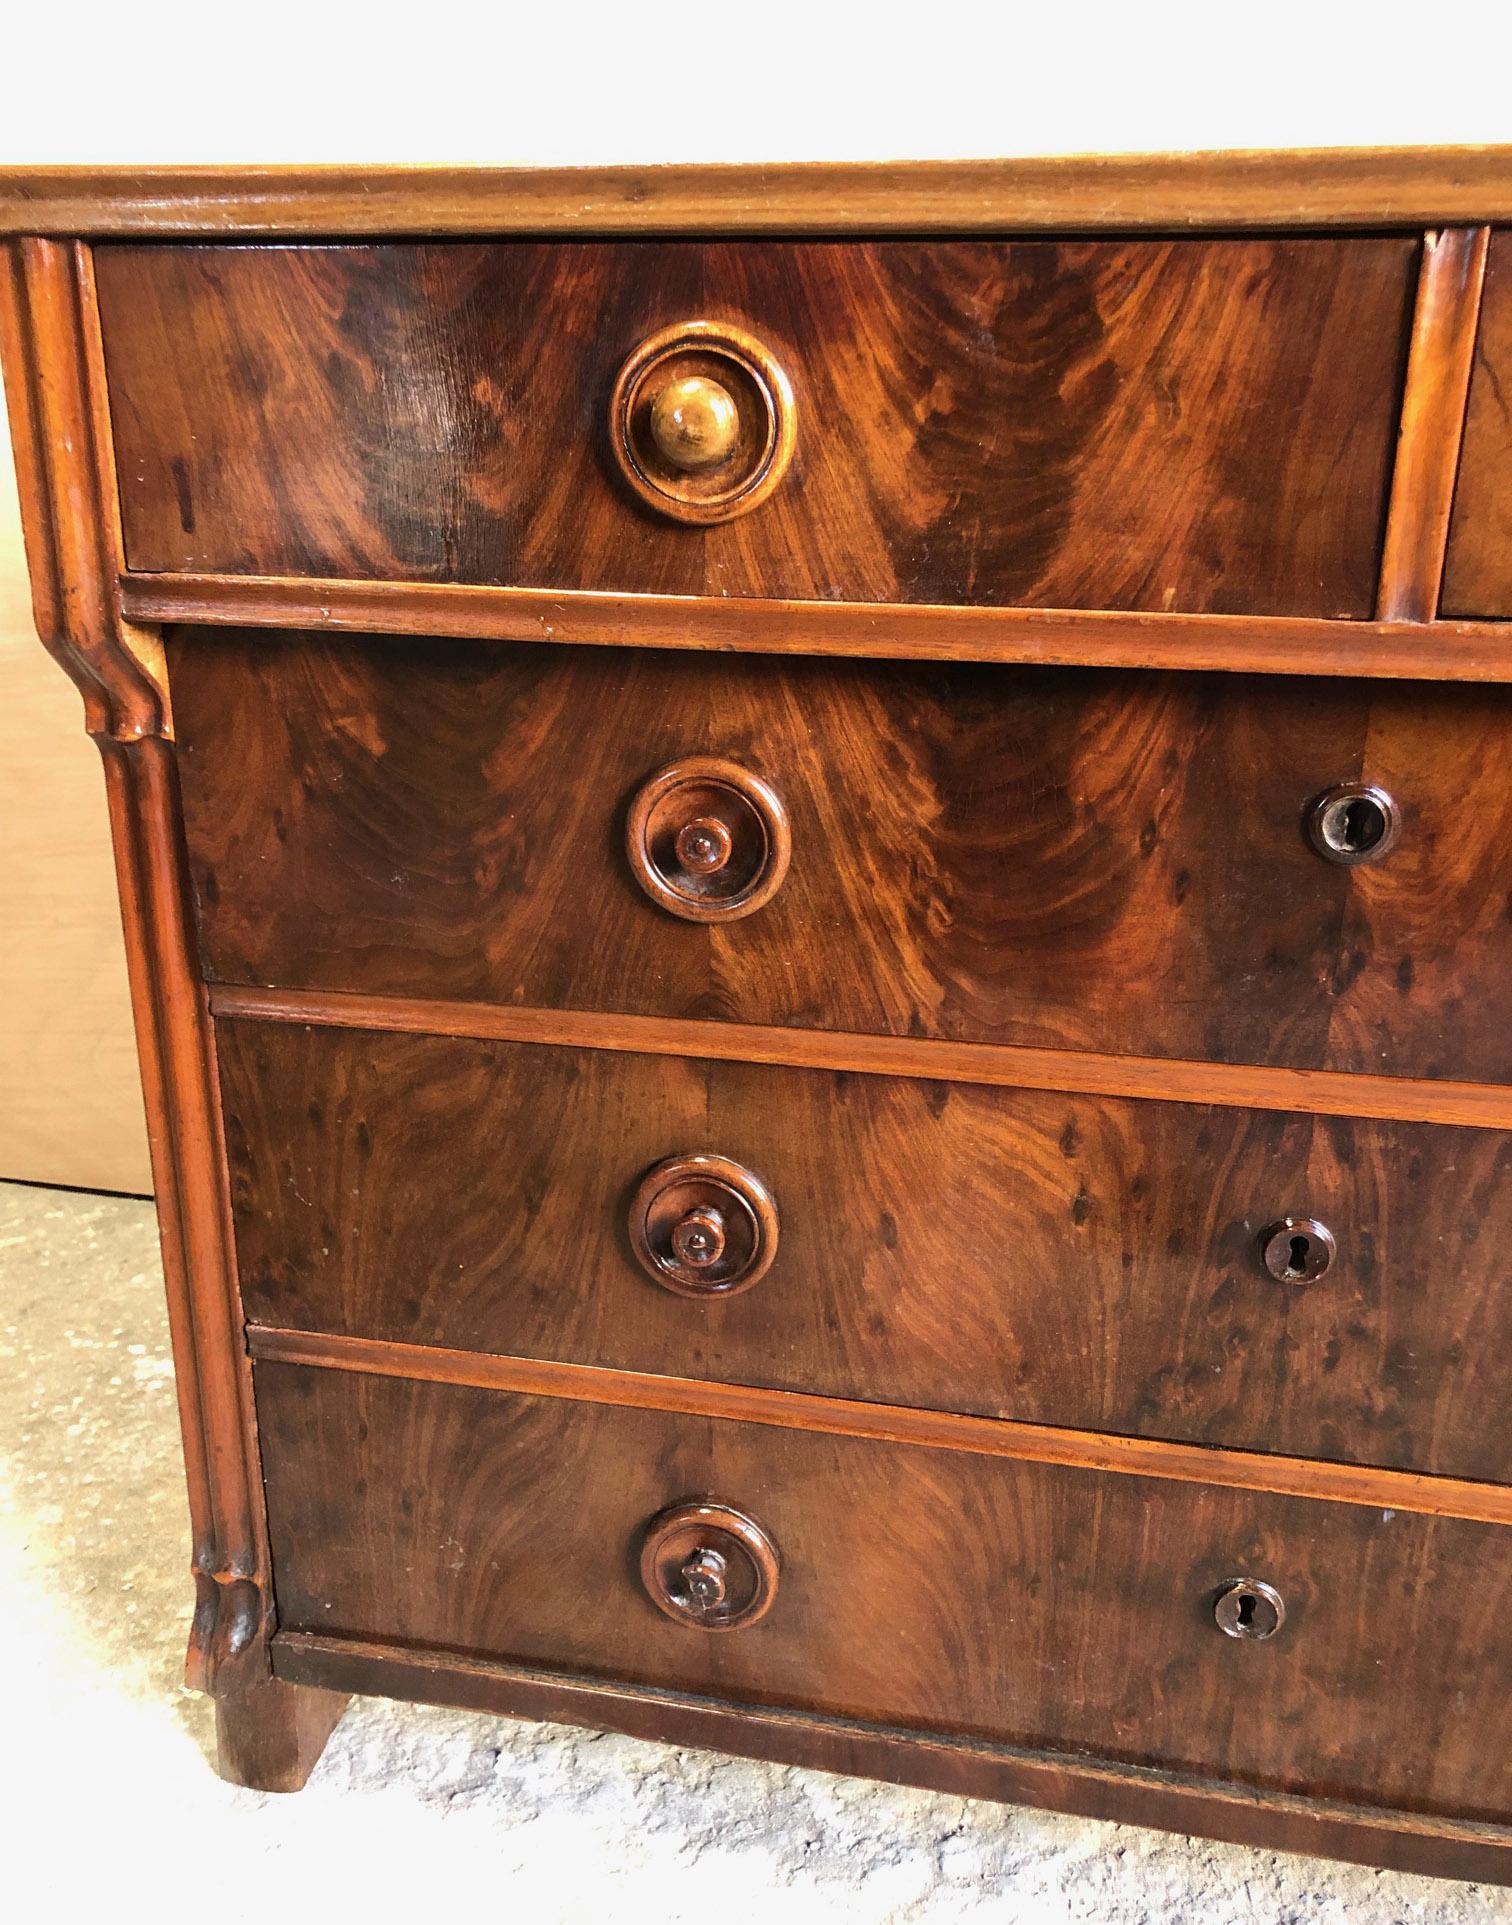 1930 Chest of Drawers in Italian Walnut Original 5 Drawers Honey Color 2